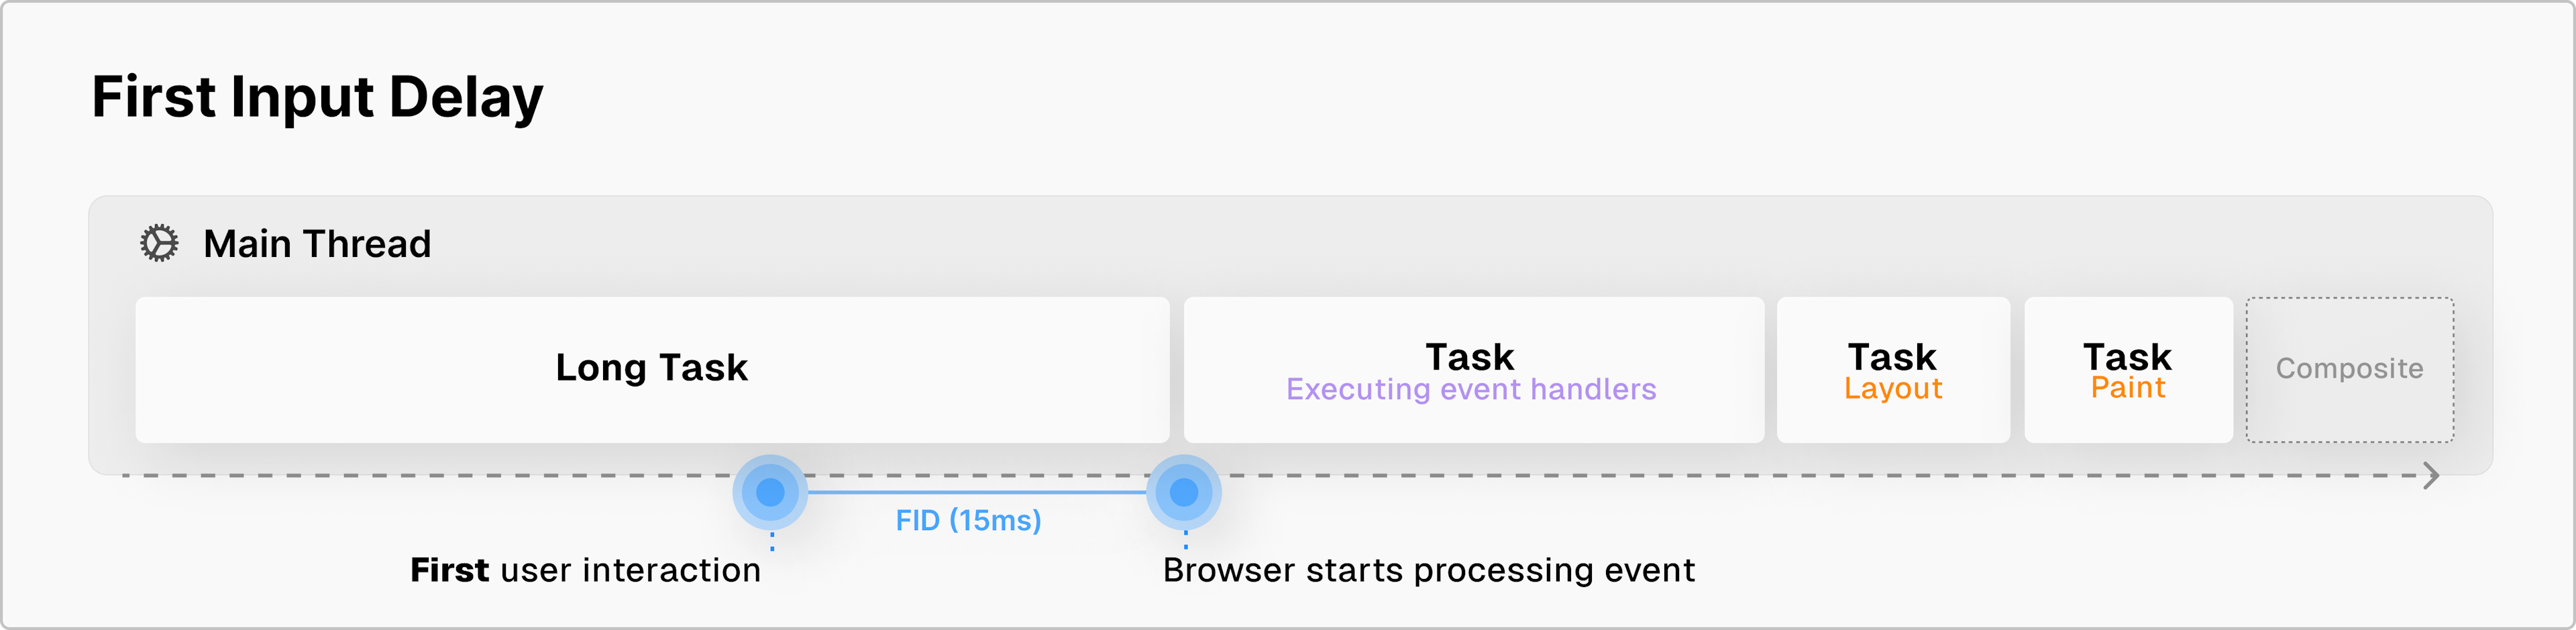 The First Input Delay measures the time between the first user interaction (clicks, taps, key presses) until the browser can process the event